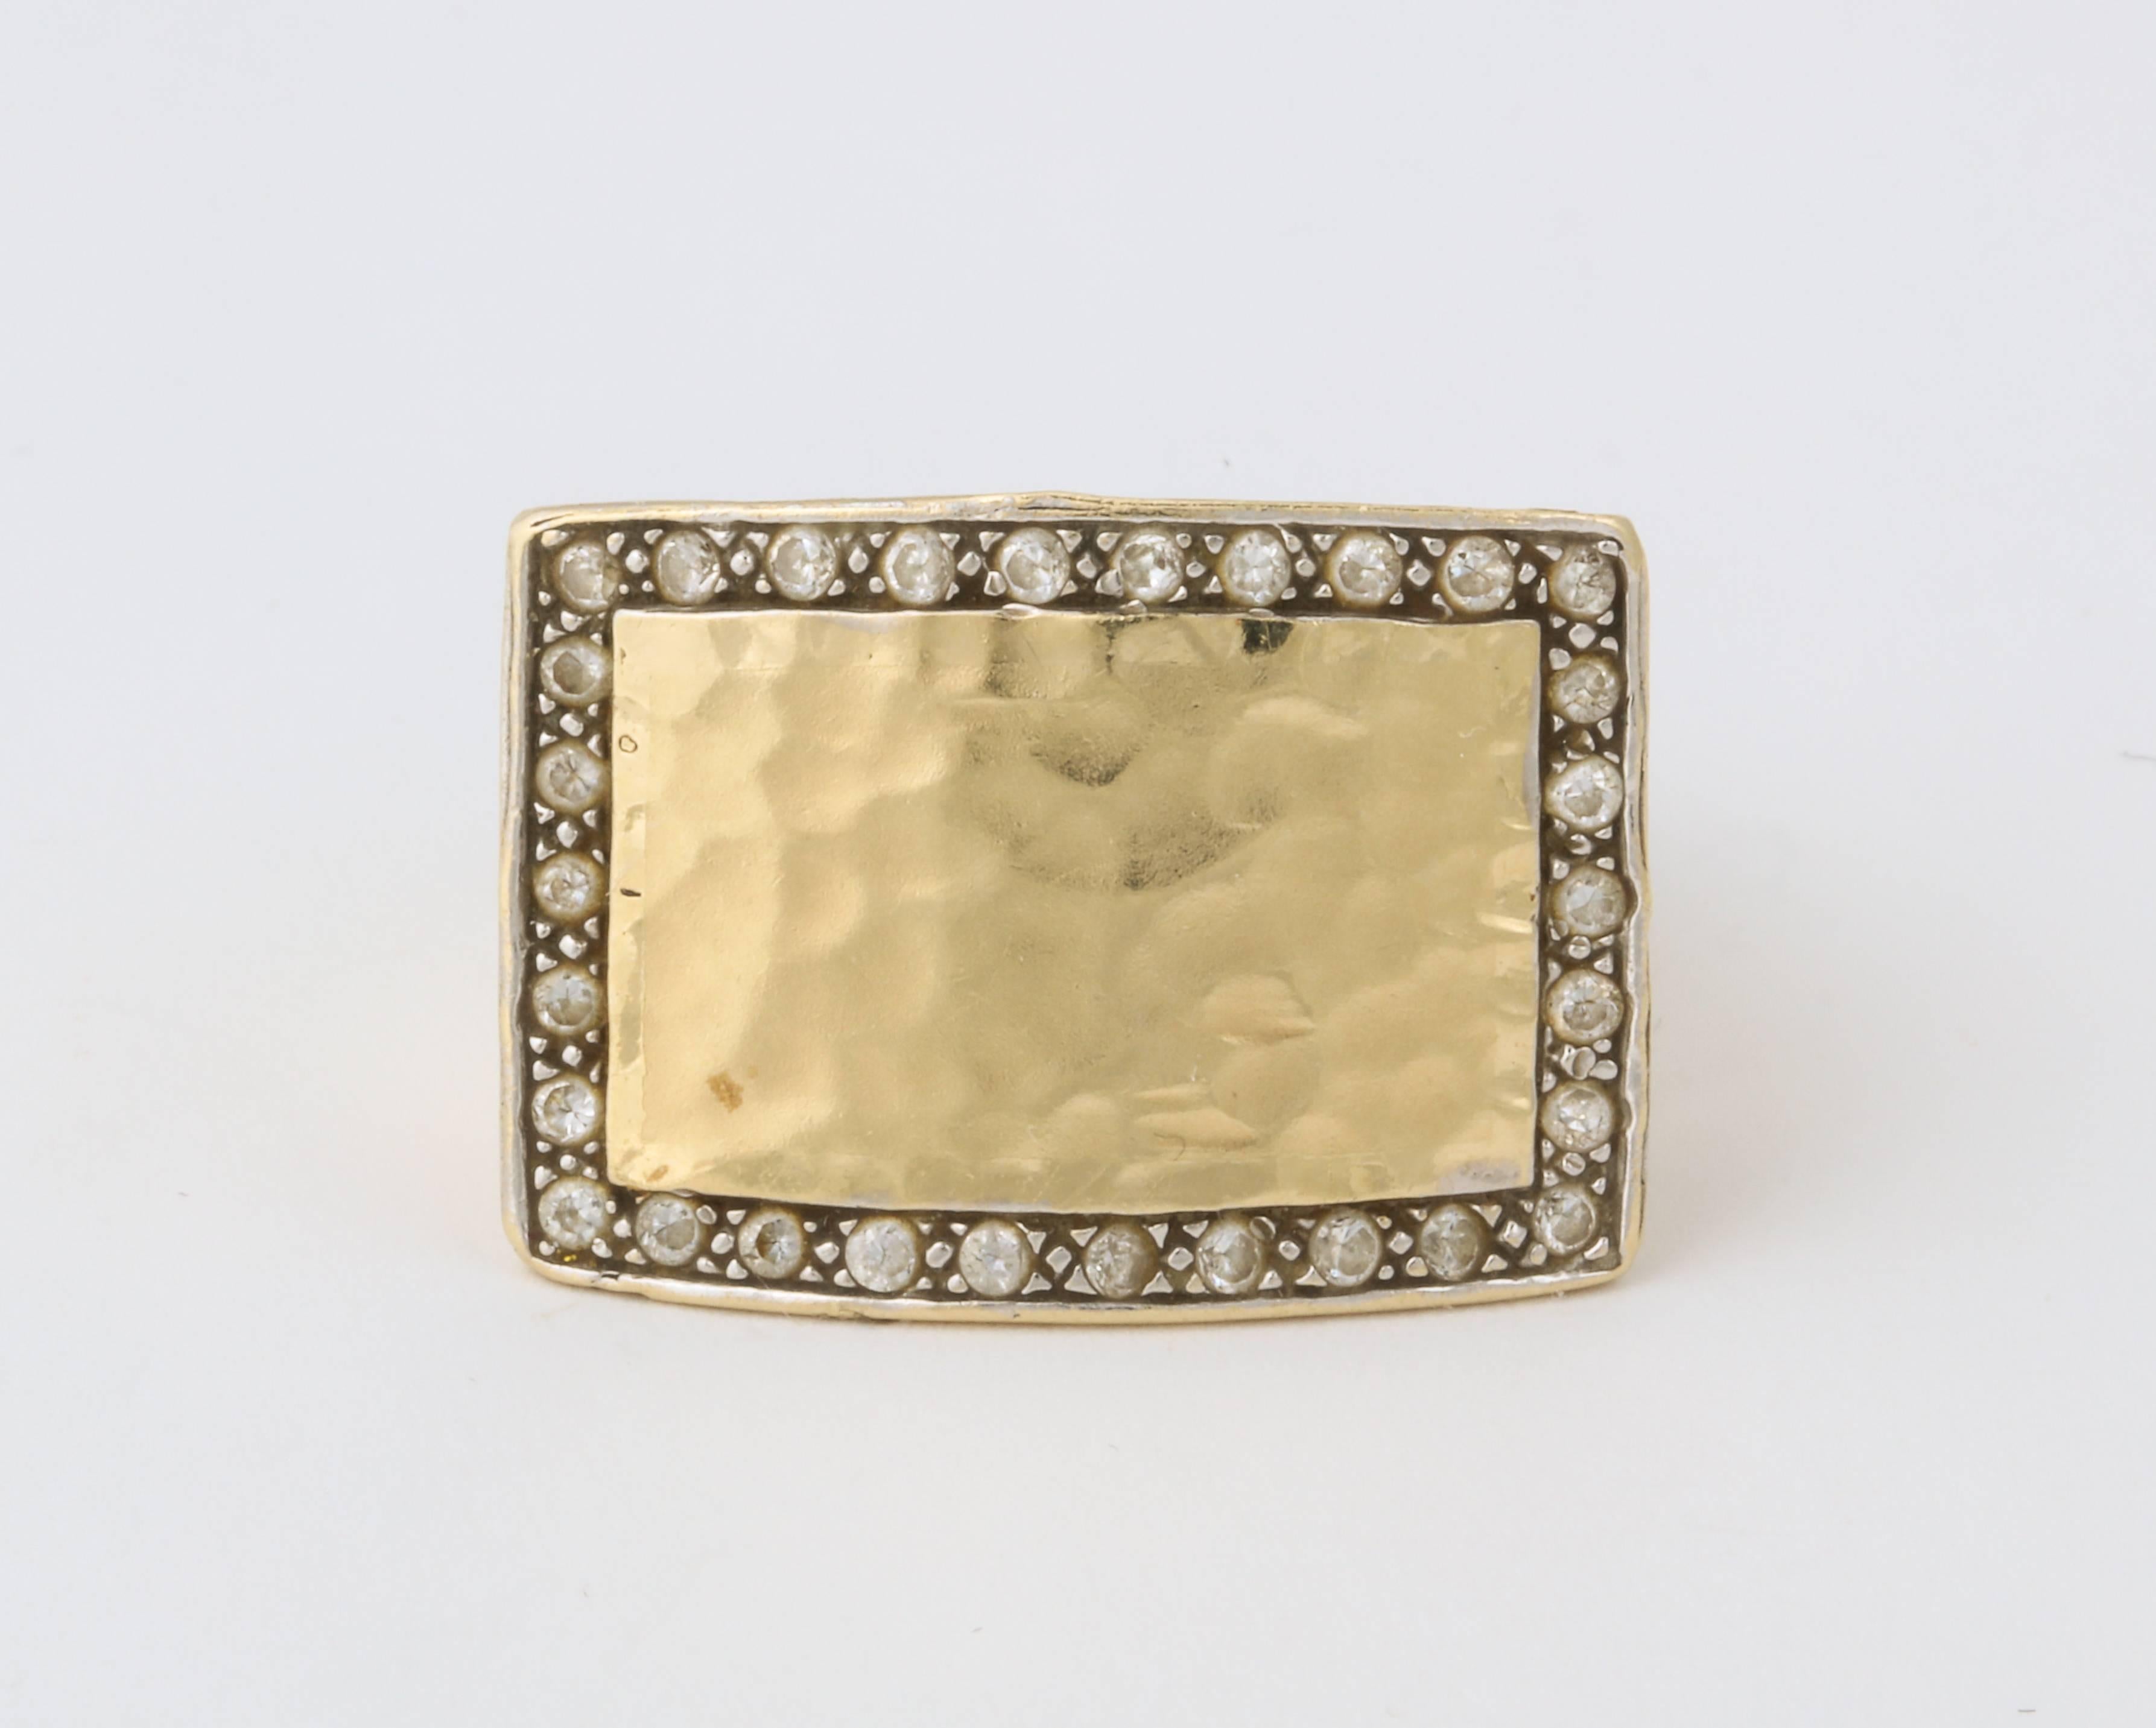 A stylish 18 kt gold ring with a hand hammered matt finish and a border of fine diamonds